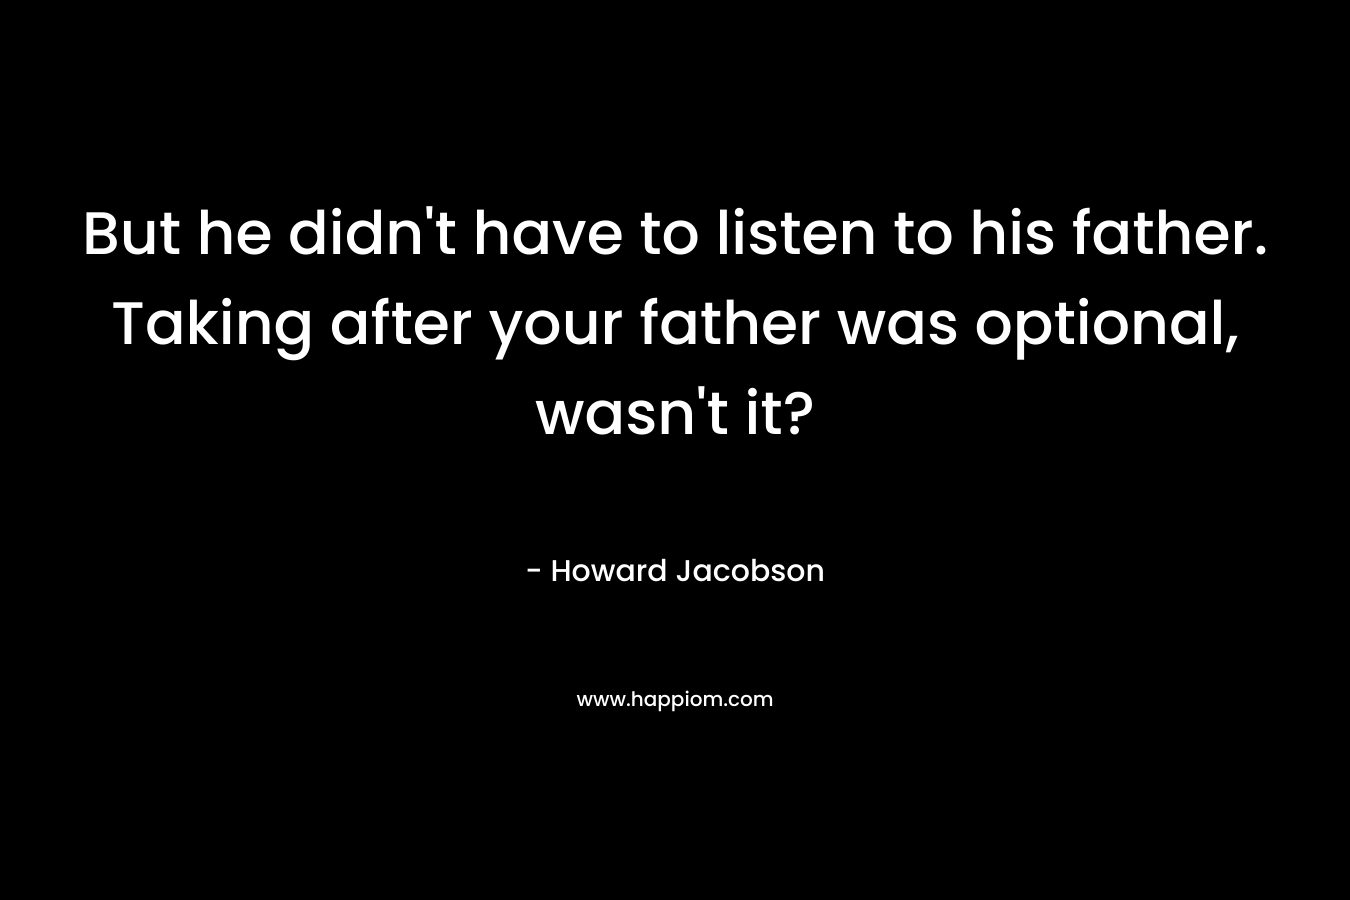 But he didn't have to listen to his father. Taking after your father was optional, wasn't it?